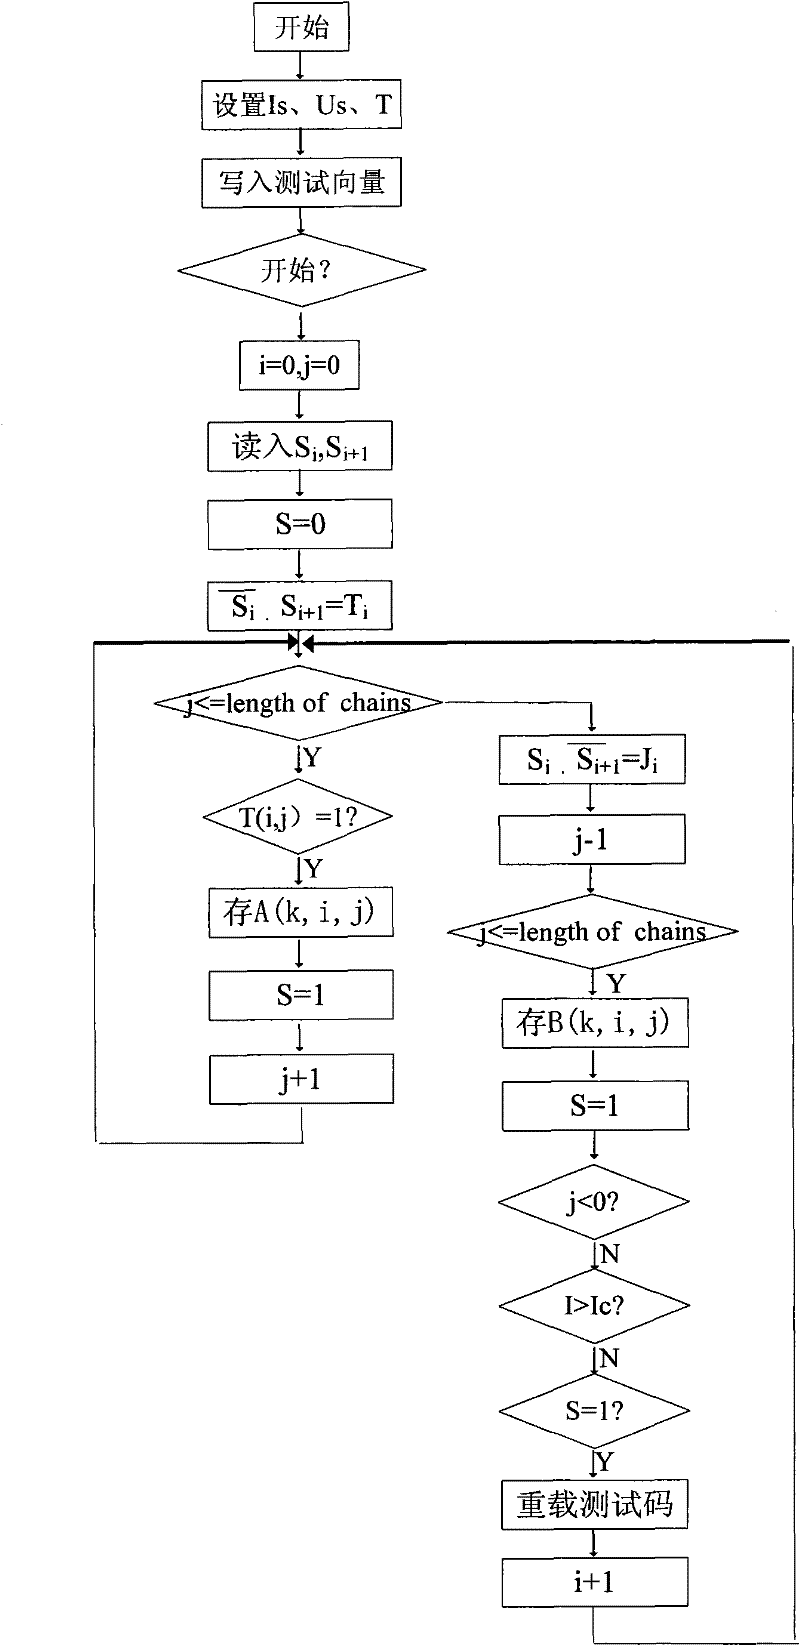 Temperature control system and method for performing single event effect test under same